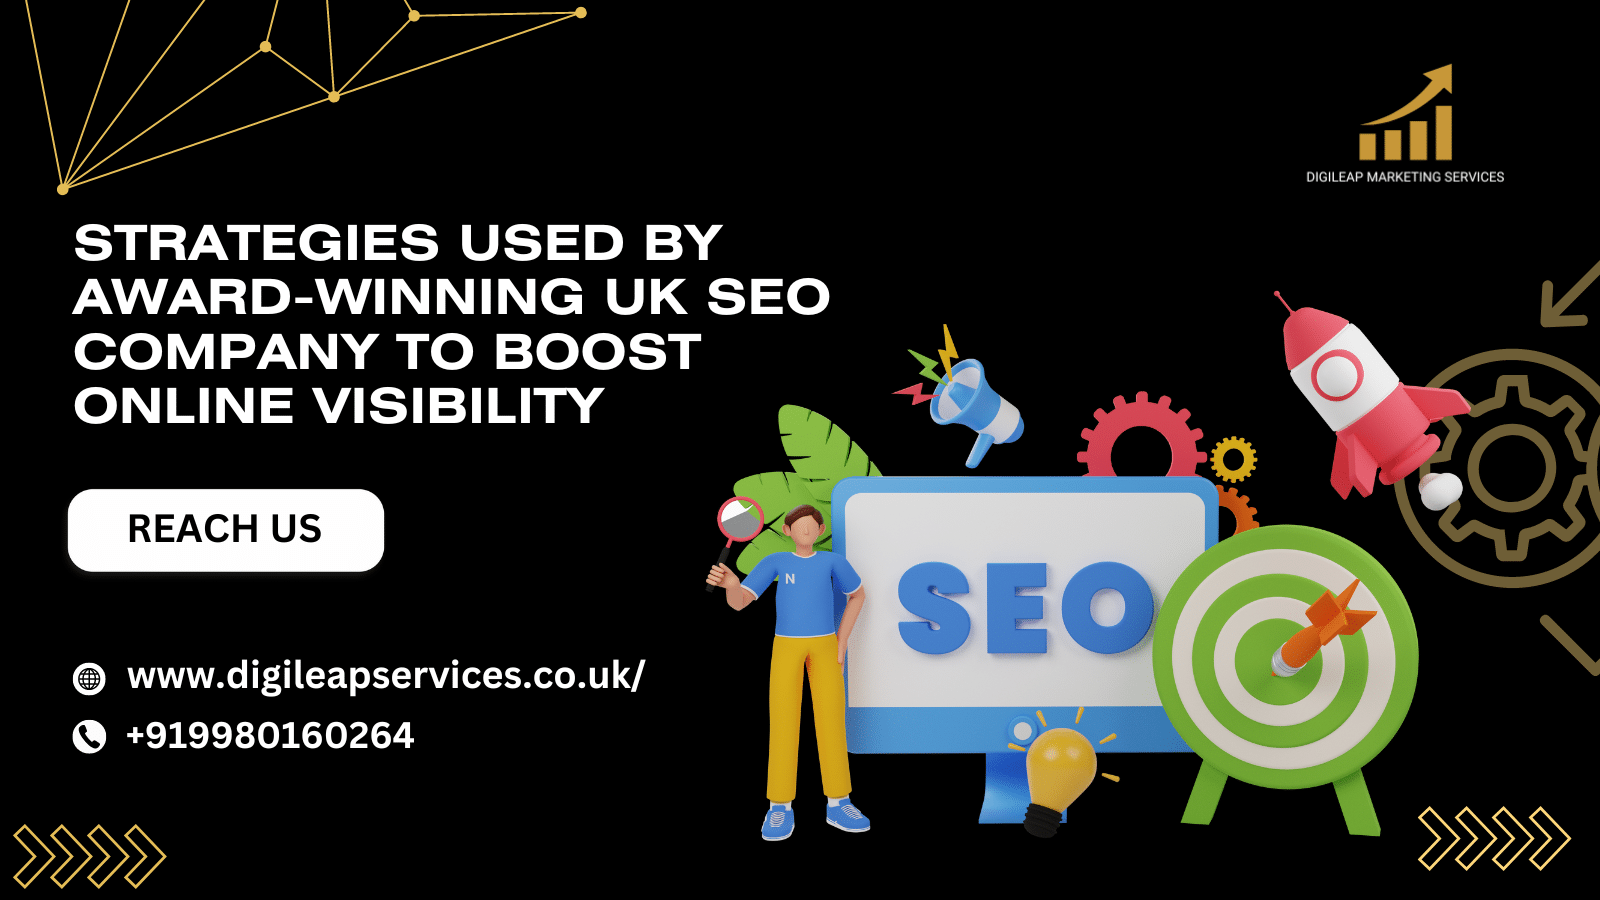 Strategies Used by Award-Winning UK SEO Company to Boost Online Visibility